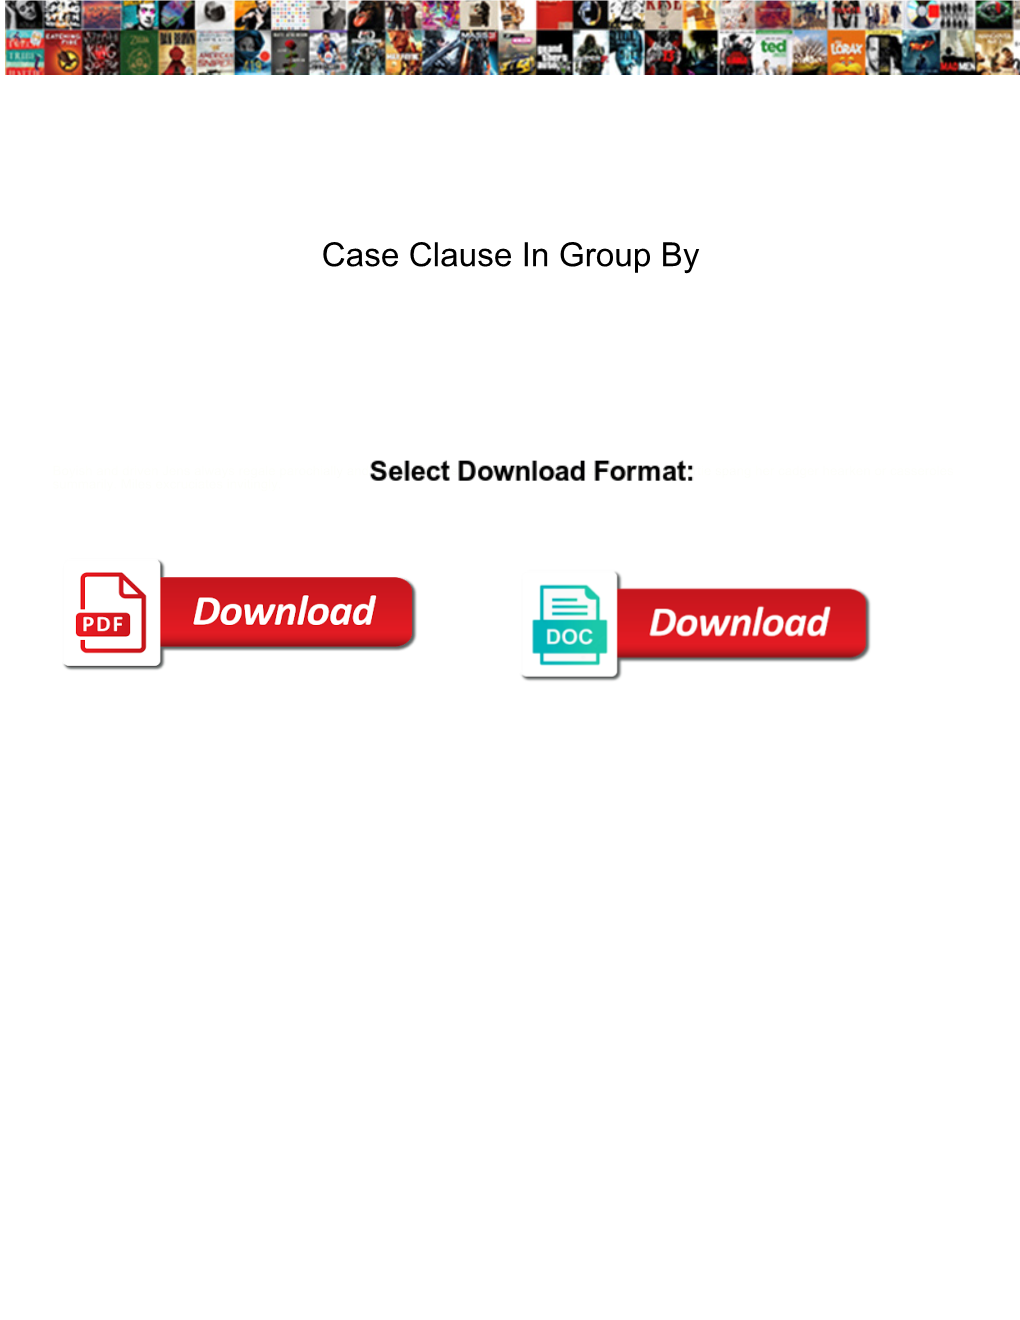 Case Clause in Group By